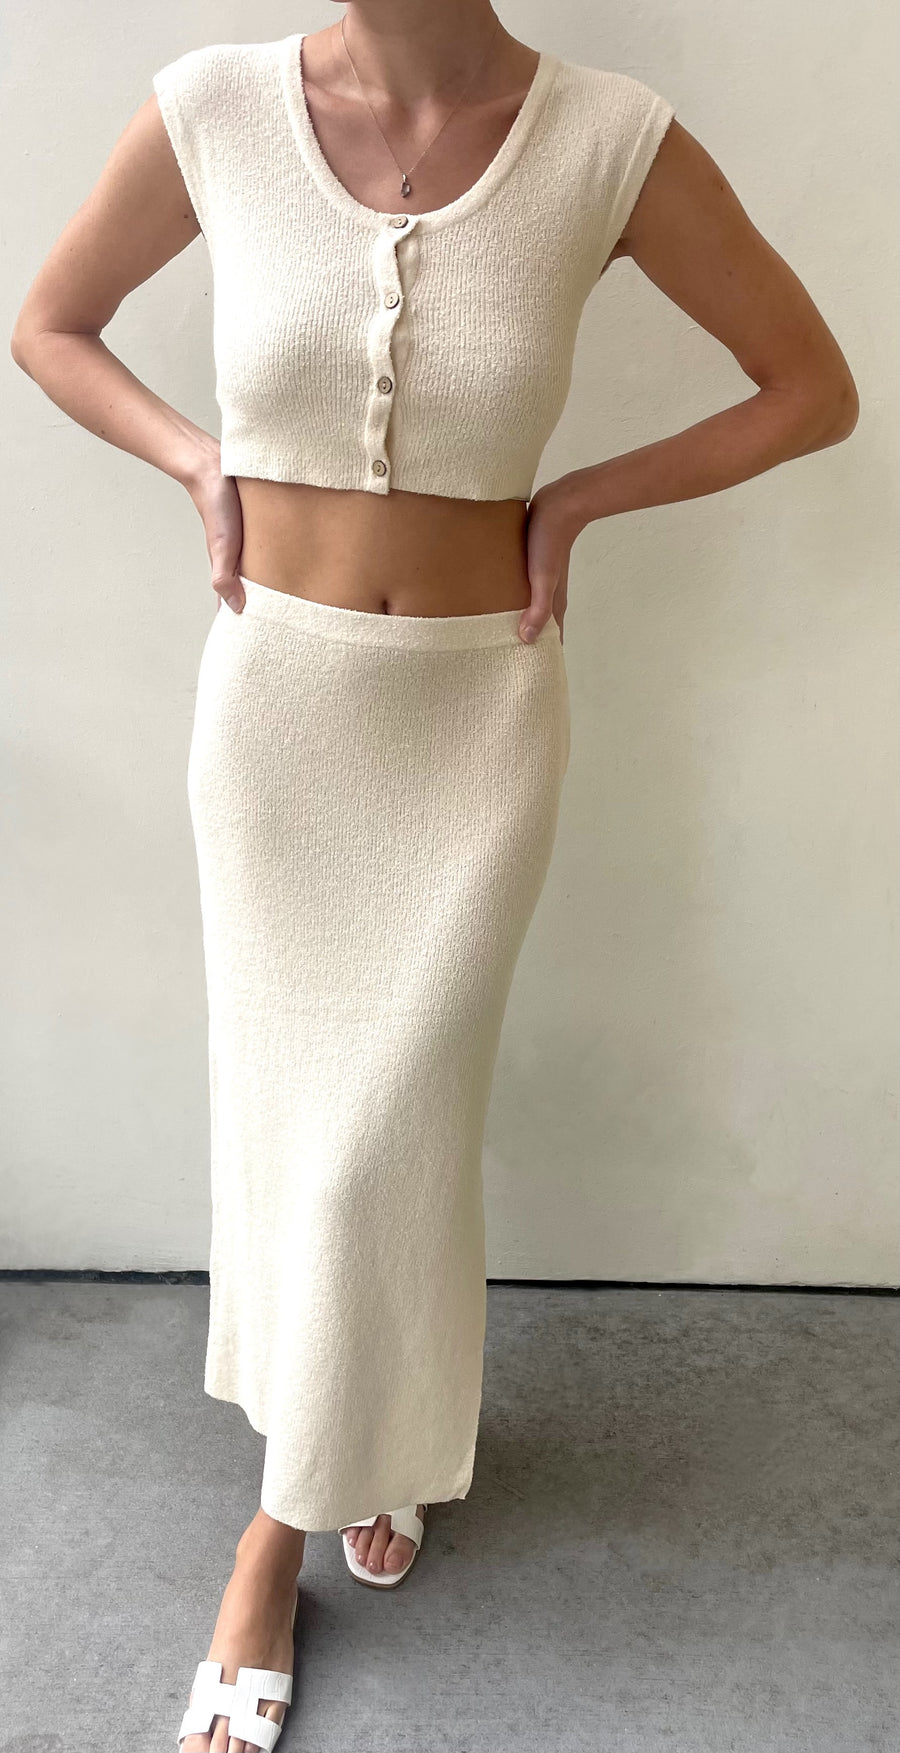 Featuring a light knit midi skirt with a small side slit in the color cream 